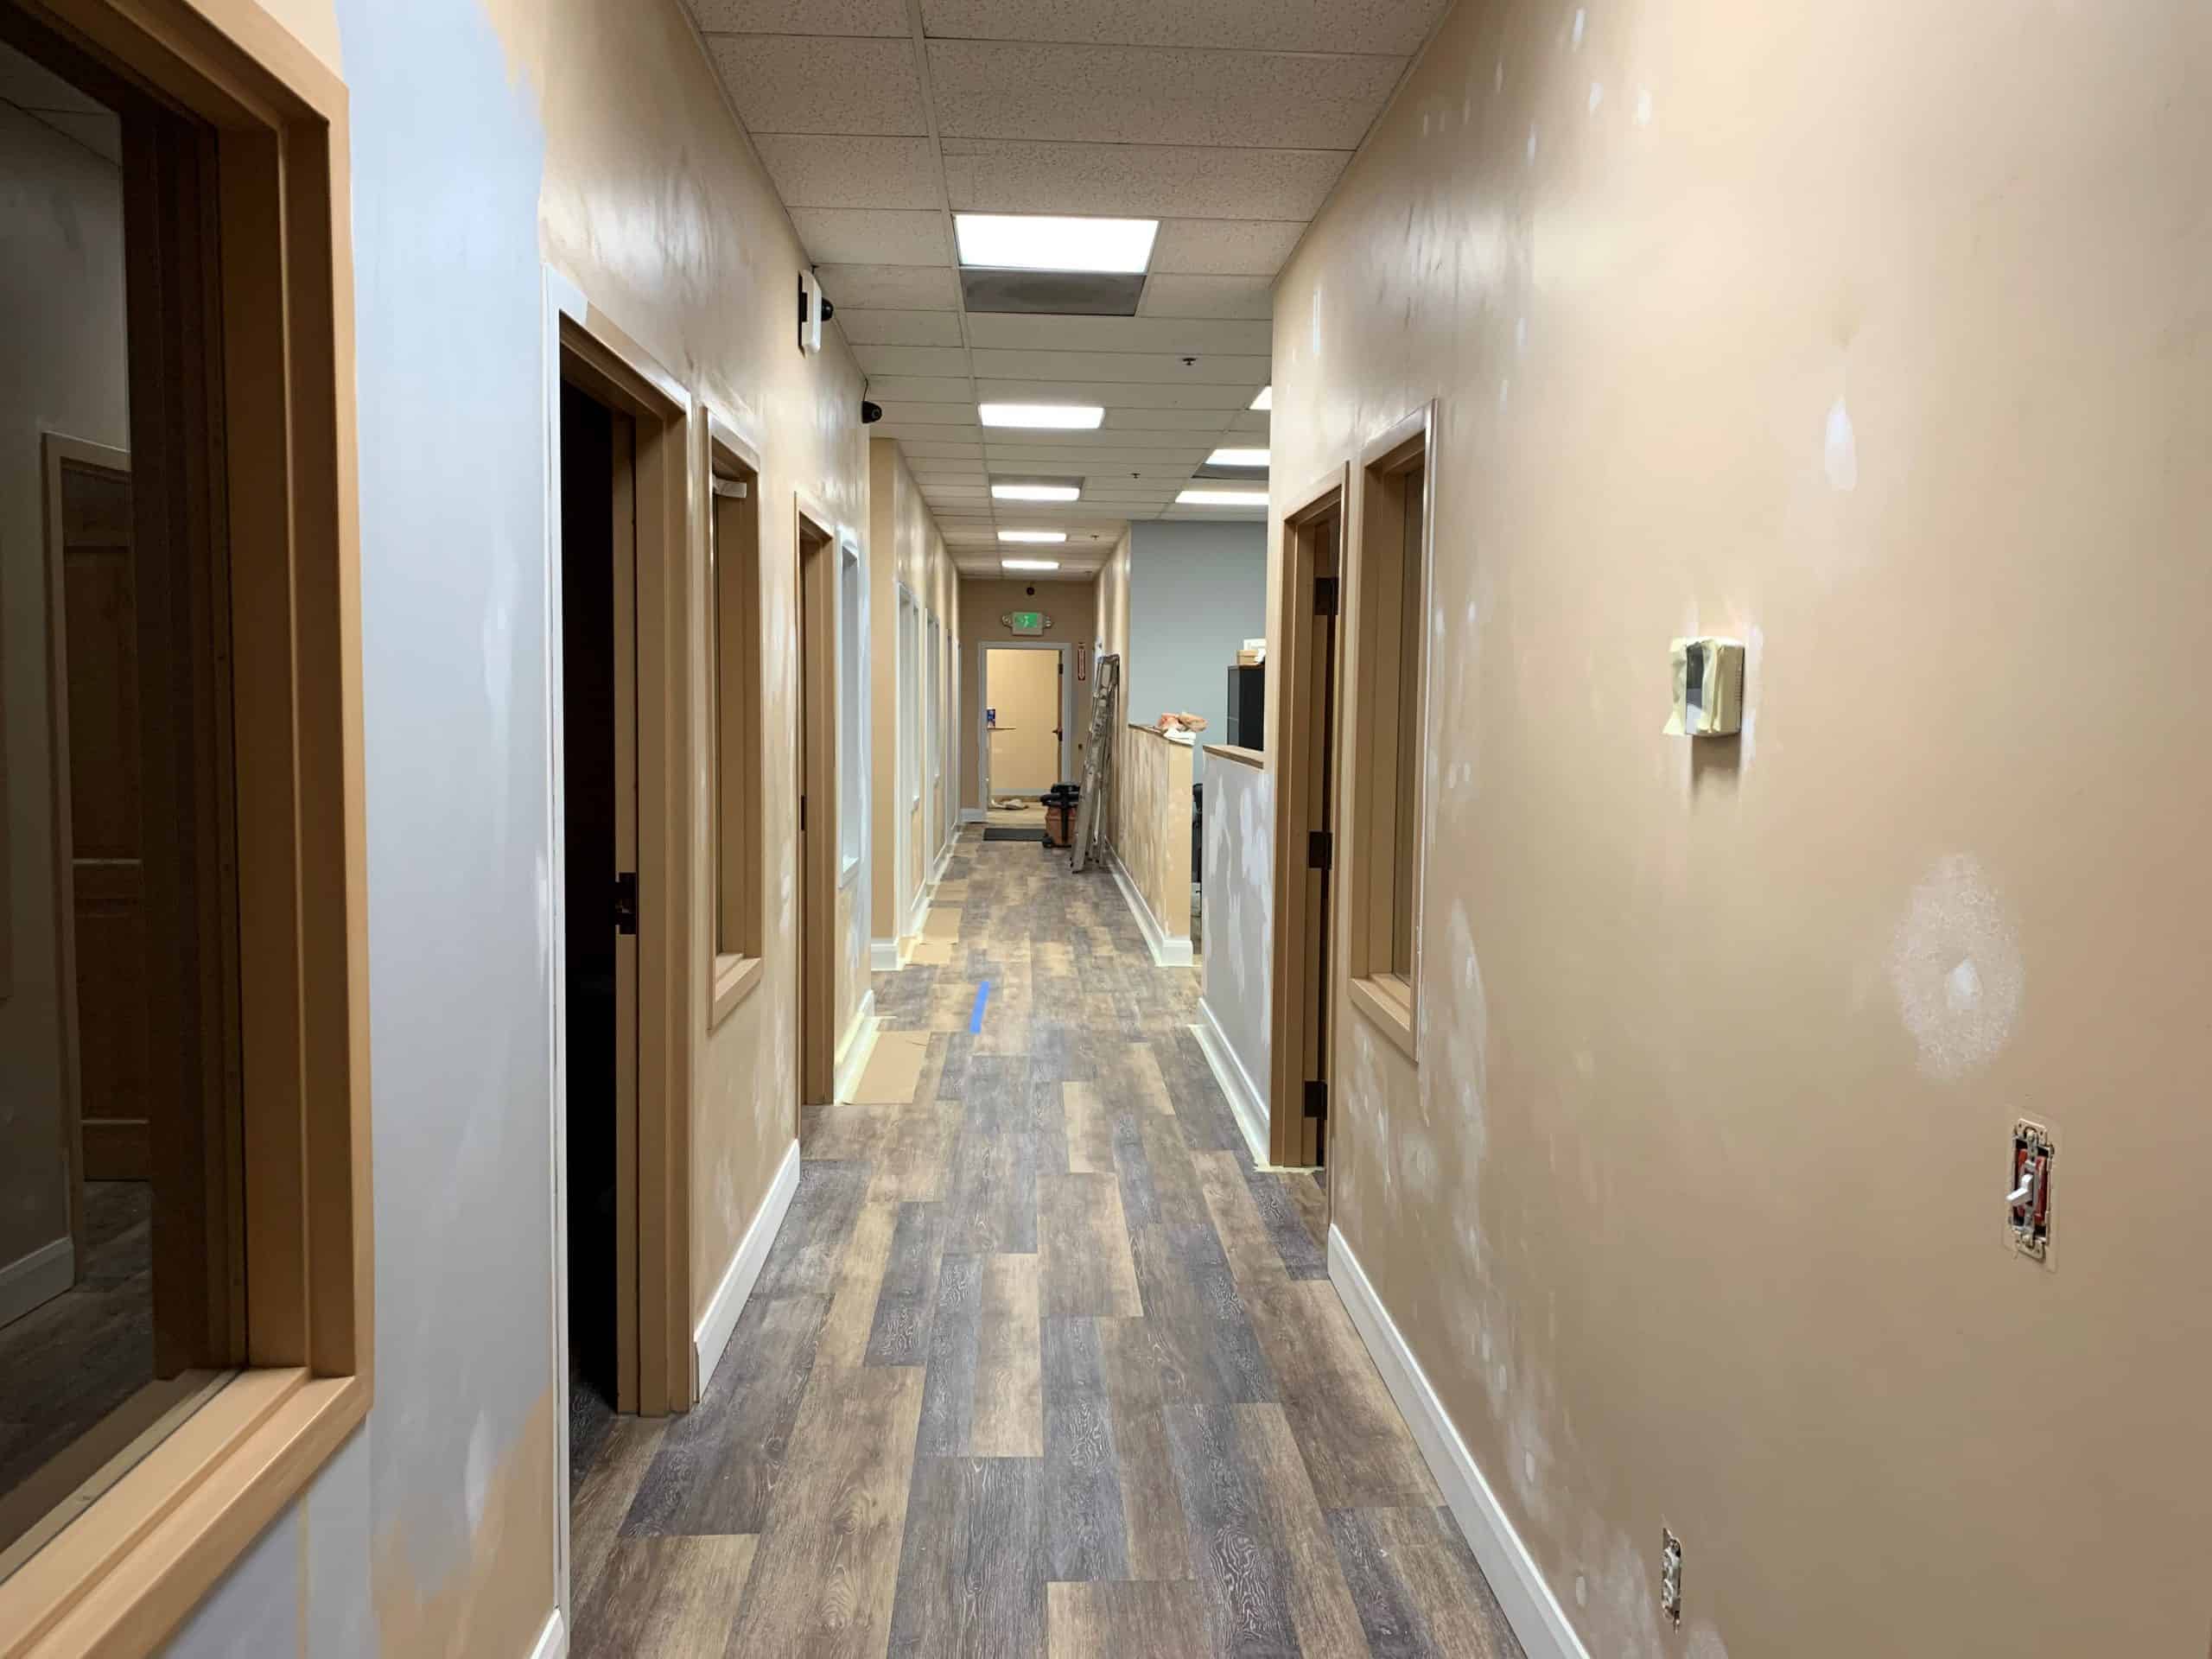 Photo of Skymail's hallway during renovations.